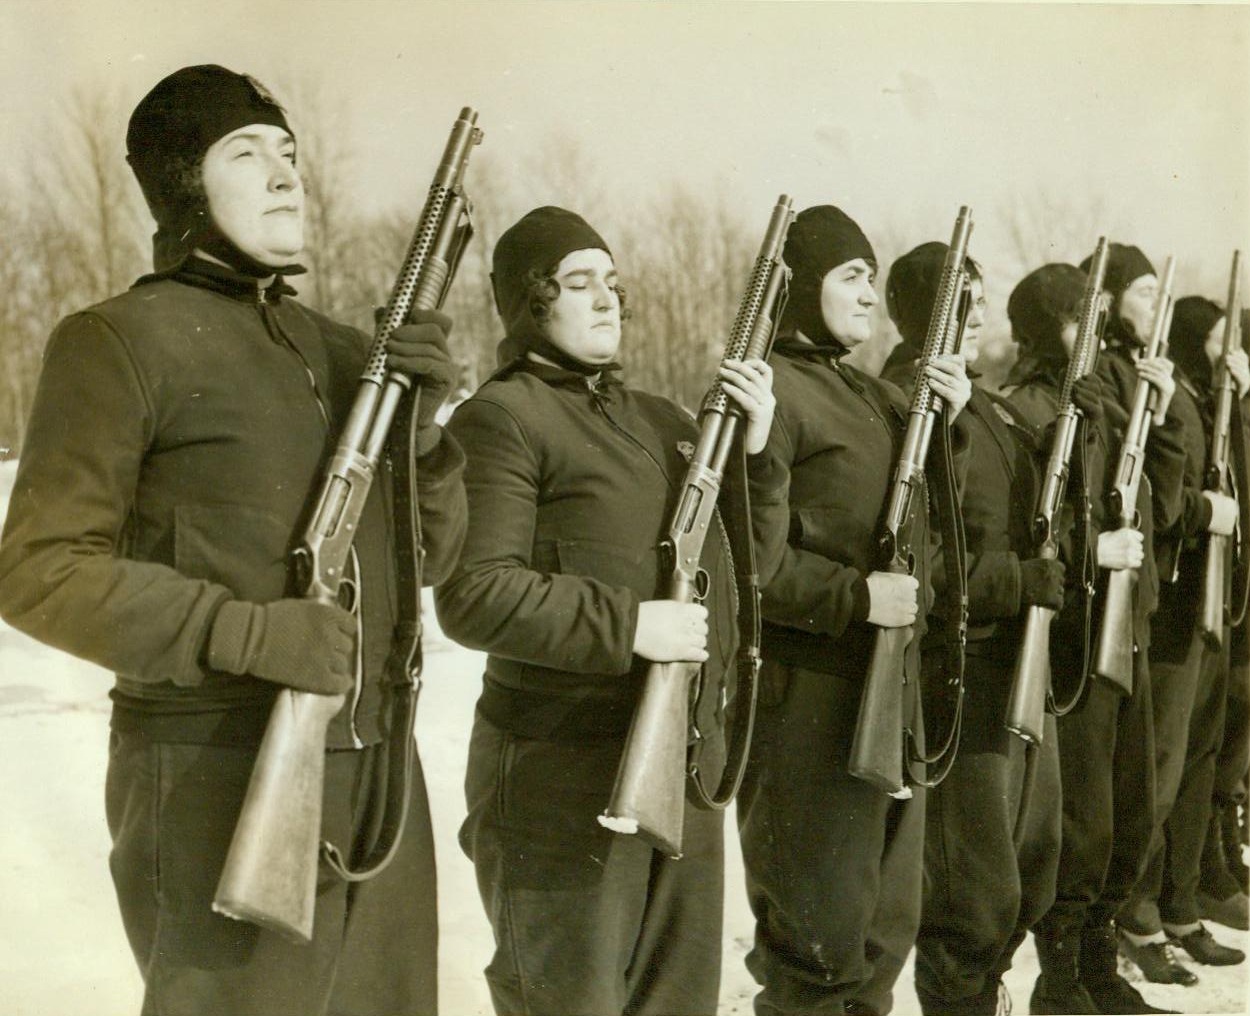 Guardians of Naval Air Station, 12/16/1942. South Weymouth, Mass:- Because they had the ability to pass a stiff civil service examination, these women were given the important task of Guarding the U.S. Naval Air Station at South Weymouth. They are the first civilian women assigned to such duties, and have released Marine and civilian male guards to more important tasks 12/16/42 (ACME);